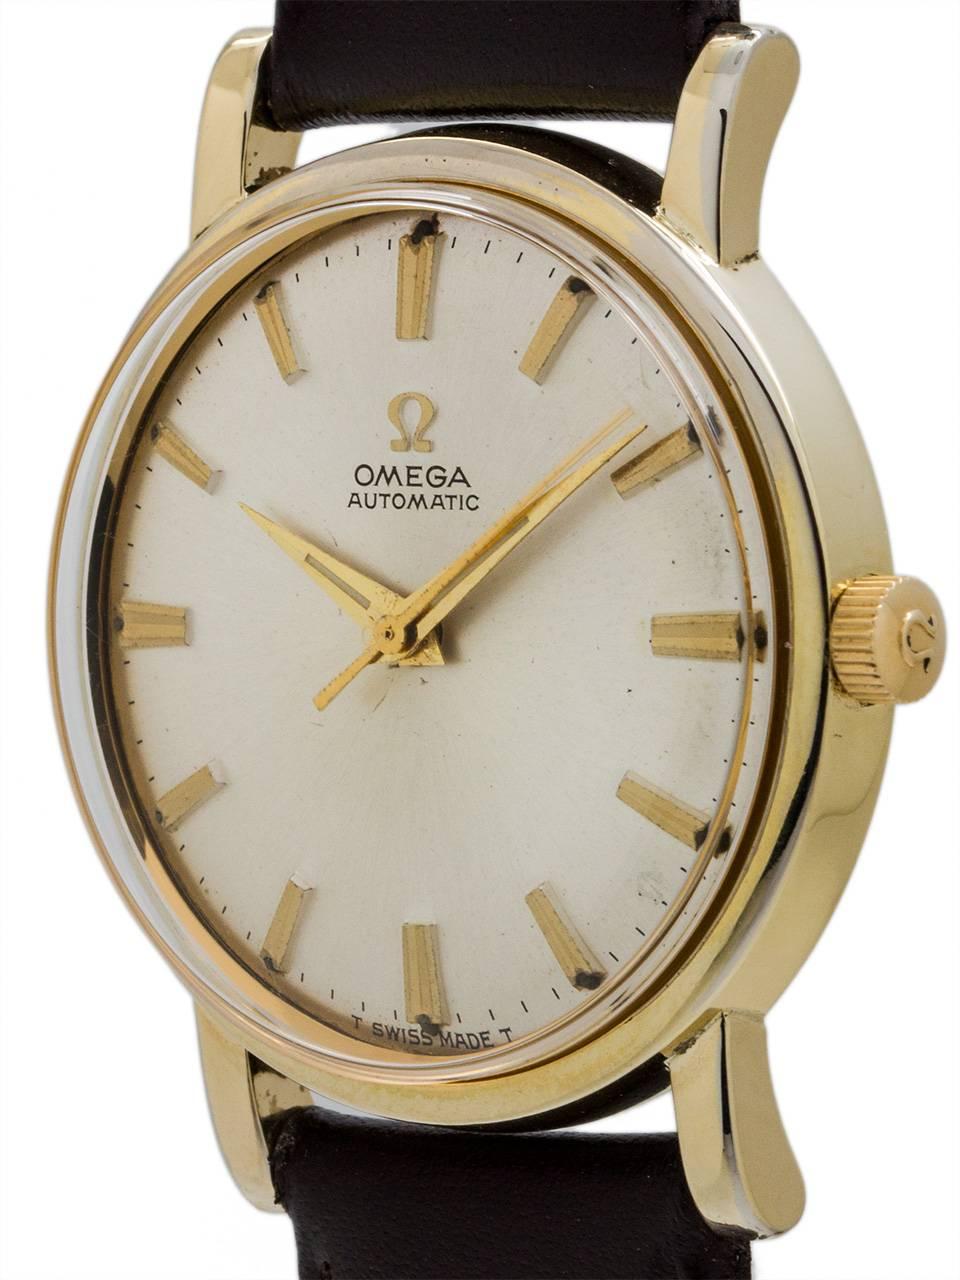 Man’s Omega automatic ref 6289 circa 1969. Featuring 33 x 39mm gold filled case with screw down case back, acrylic dome crystal, and very clean original silvered satin dial with gold applied indexes, applied Omega logo, and tapered dauphine hands.